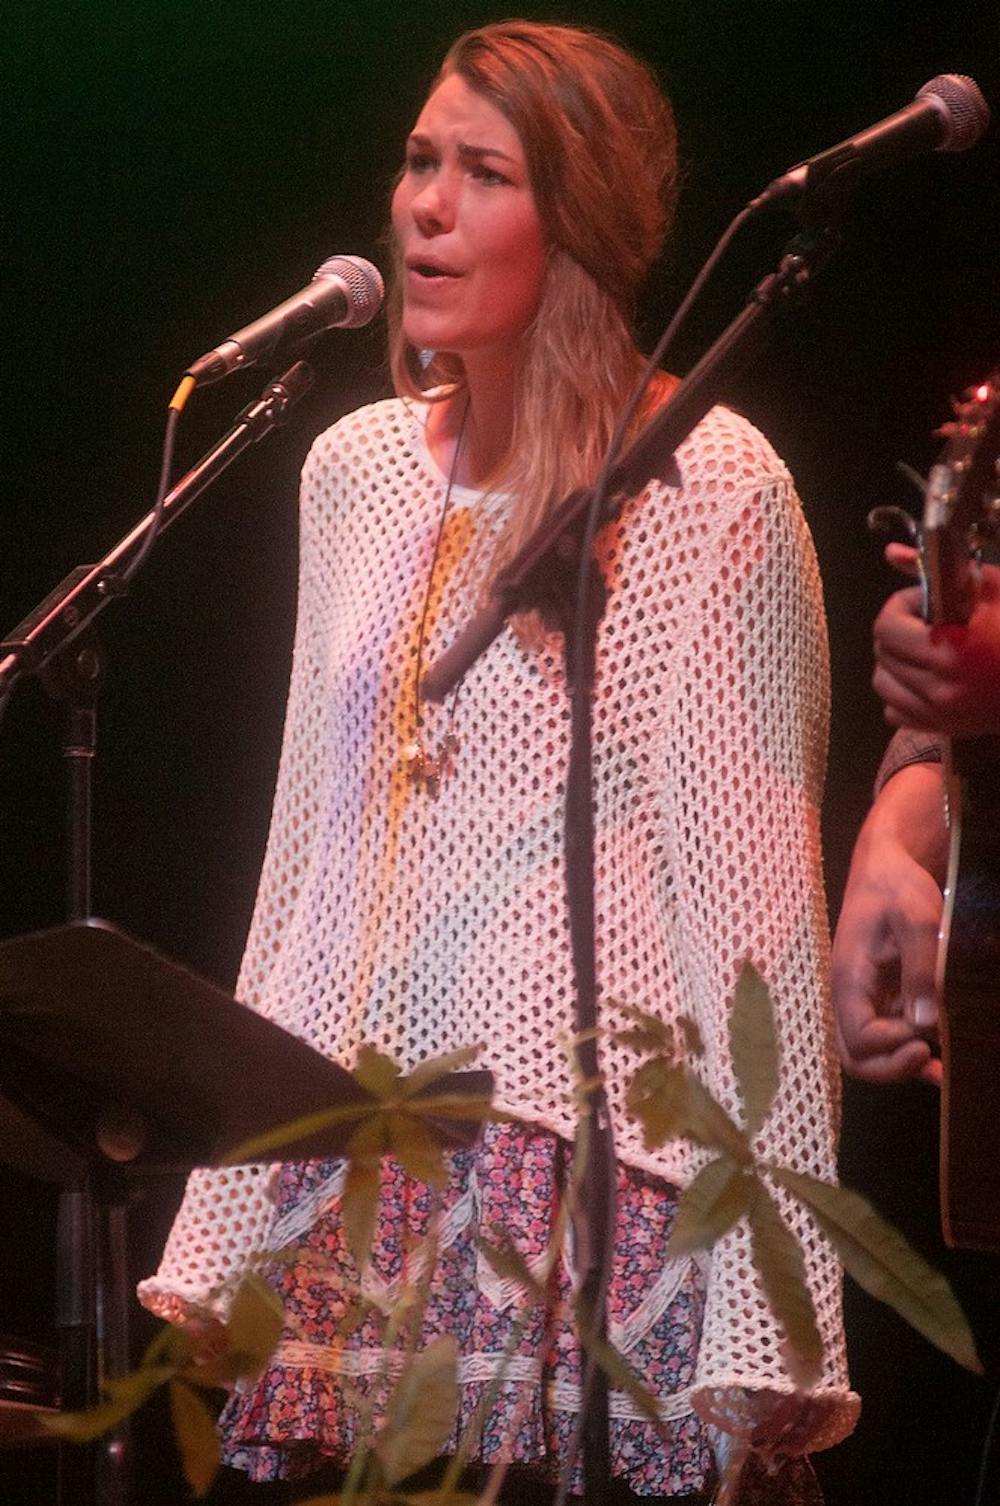 <p>Co-founder of "Songs Against Slavery," Grace Theisen sings on April 16, 2014, at Wharton Center for Performing Arts. The event supported the nonprofit "Project Liberty" which works to stop human trafficking in the U.S. Betsy Agosta/The State News</p>